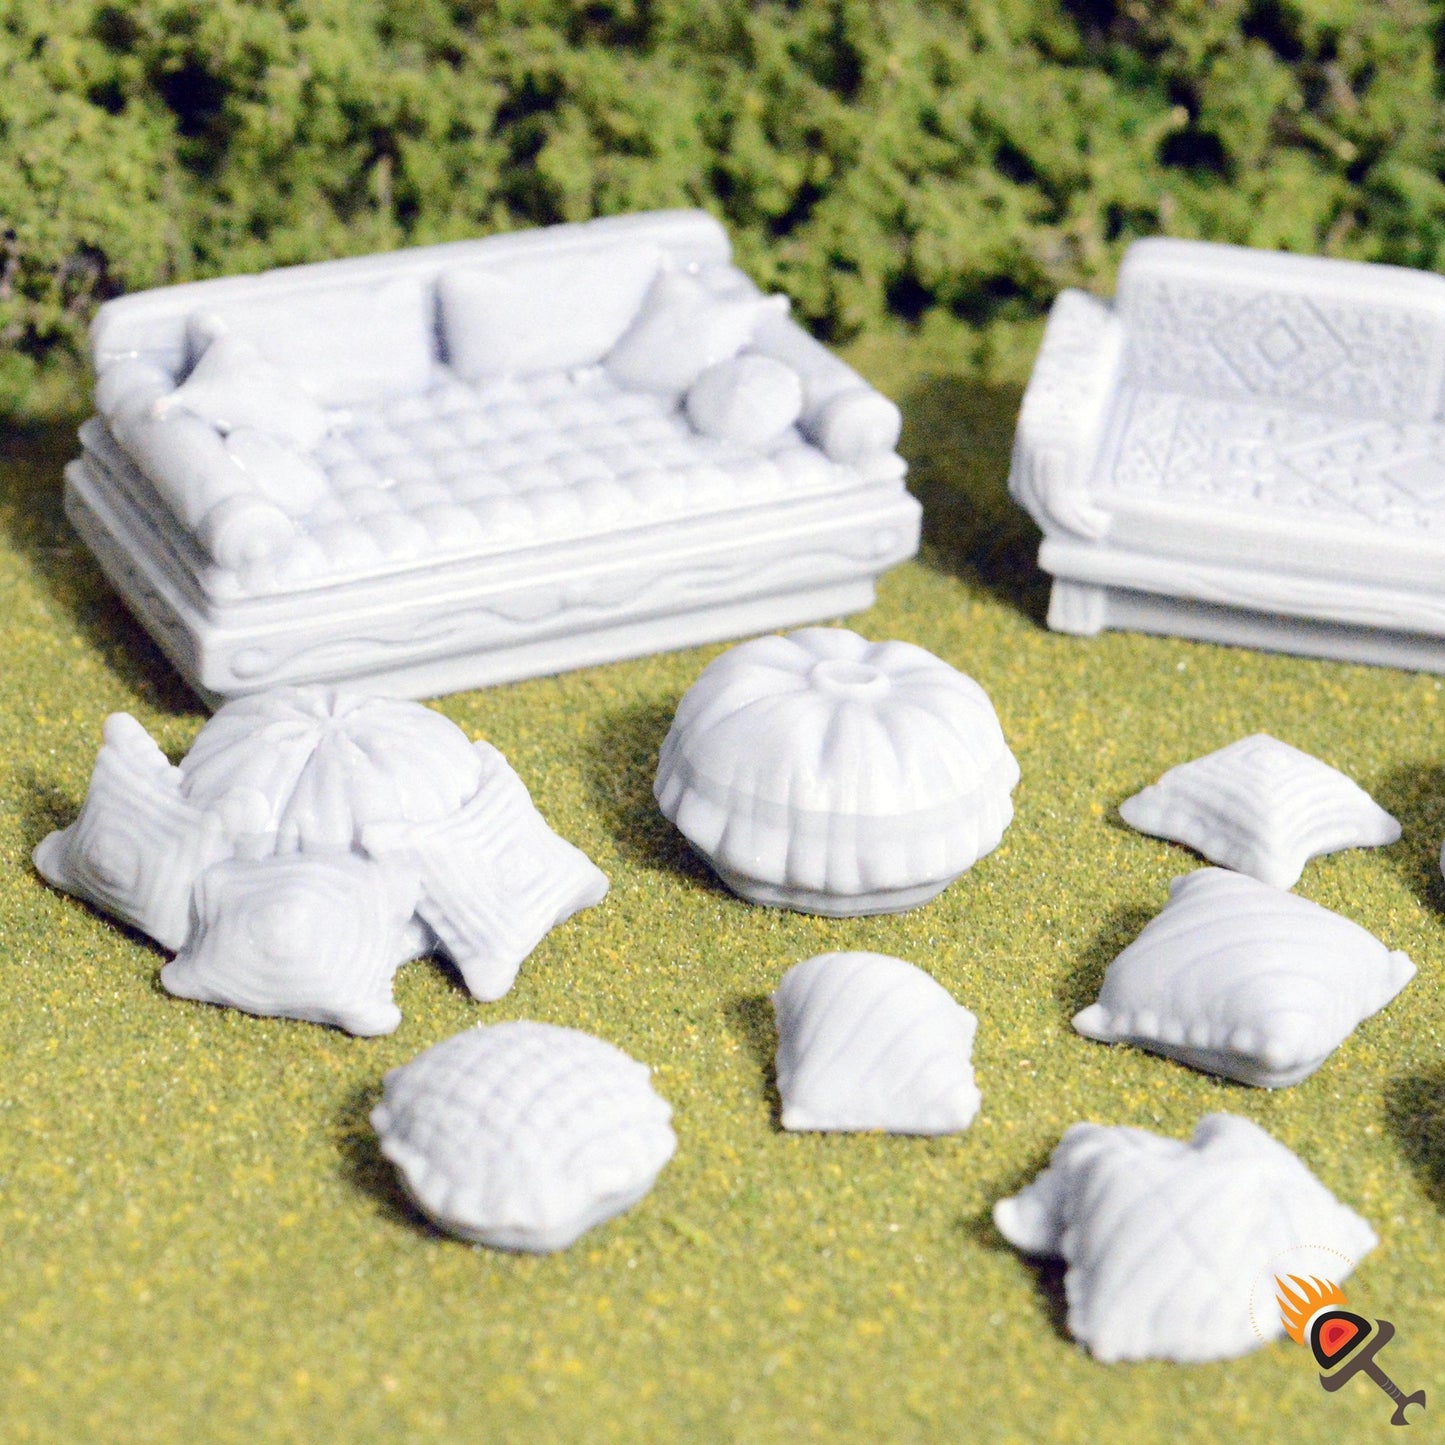 Miniature Couches, Cushions and Pillows 28mm 32mm for D&D Terrain, DnD Pathfinder Desert Palace Furniture